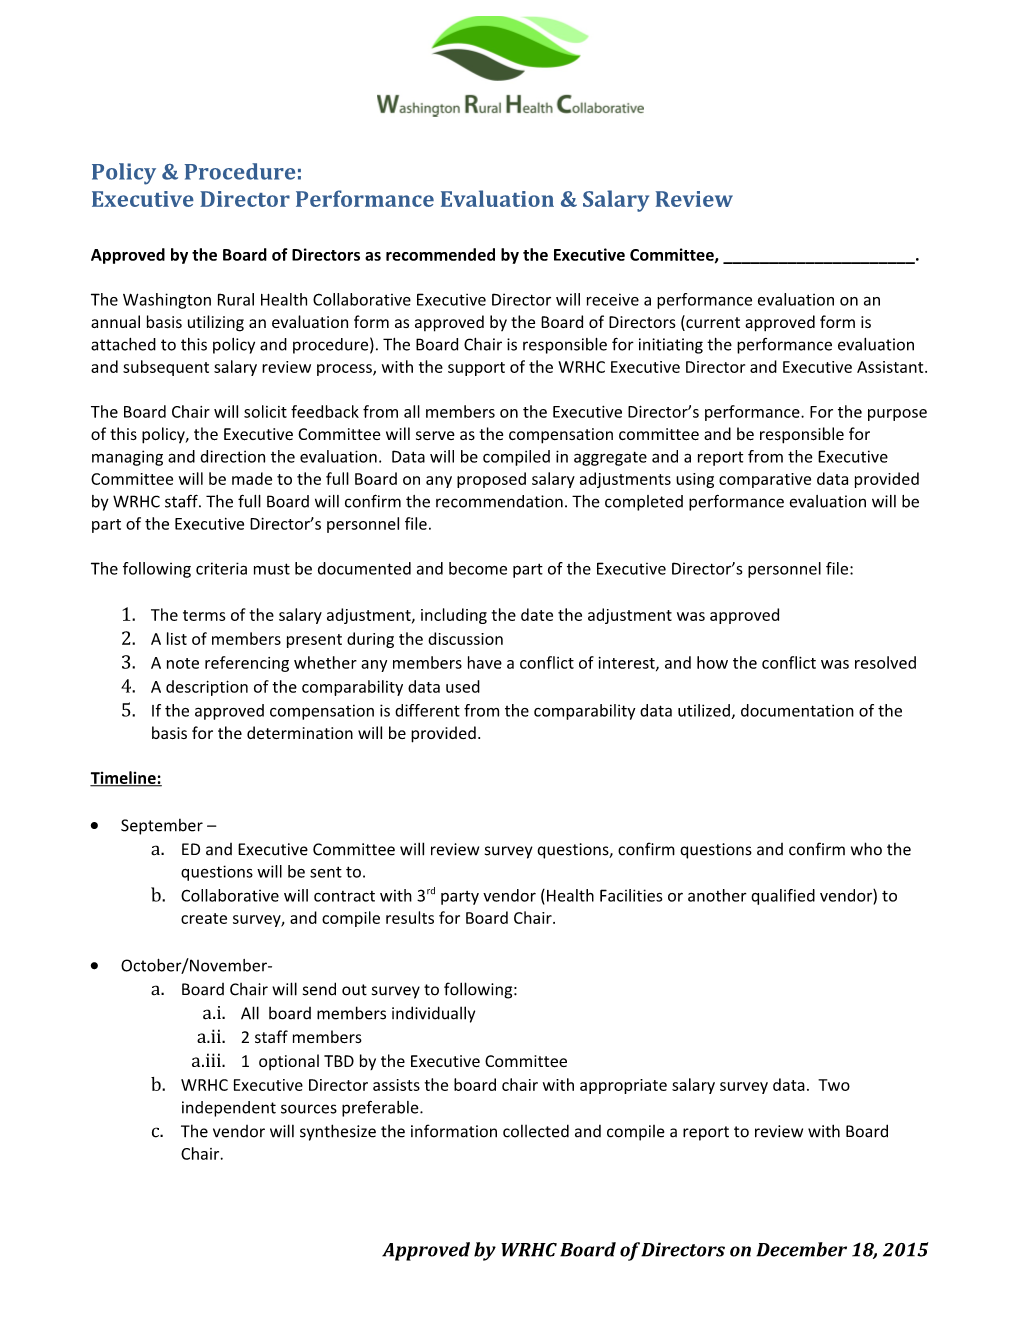 Executive Director Performance Evaluation & Salary Review